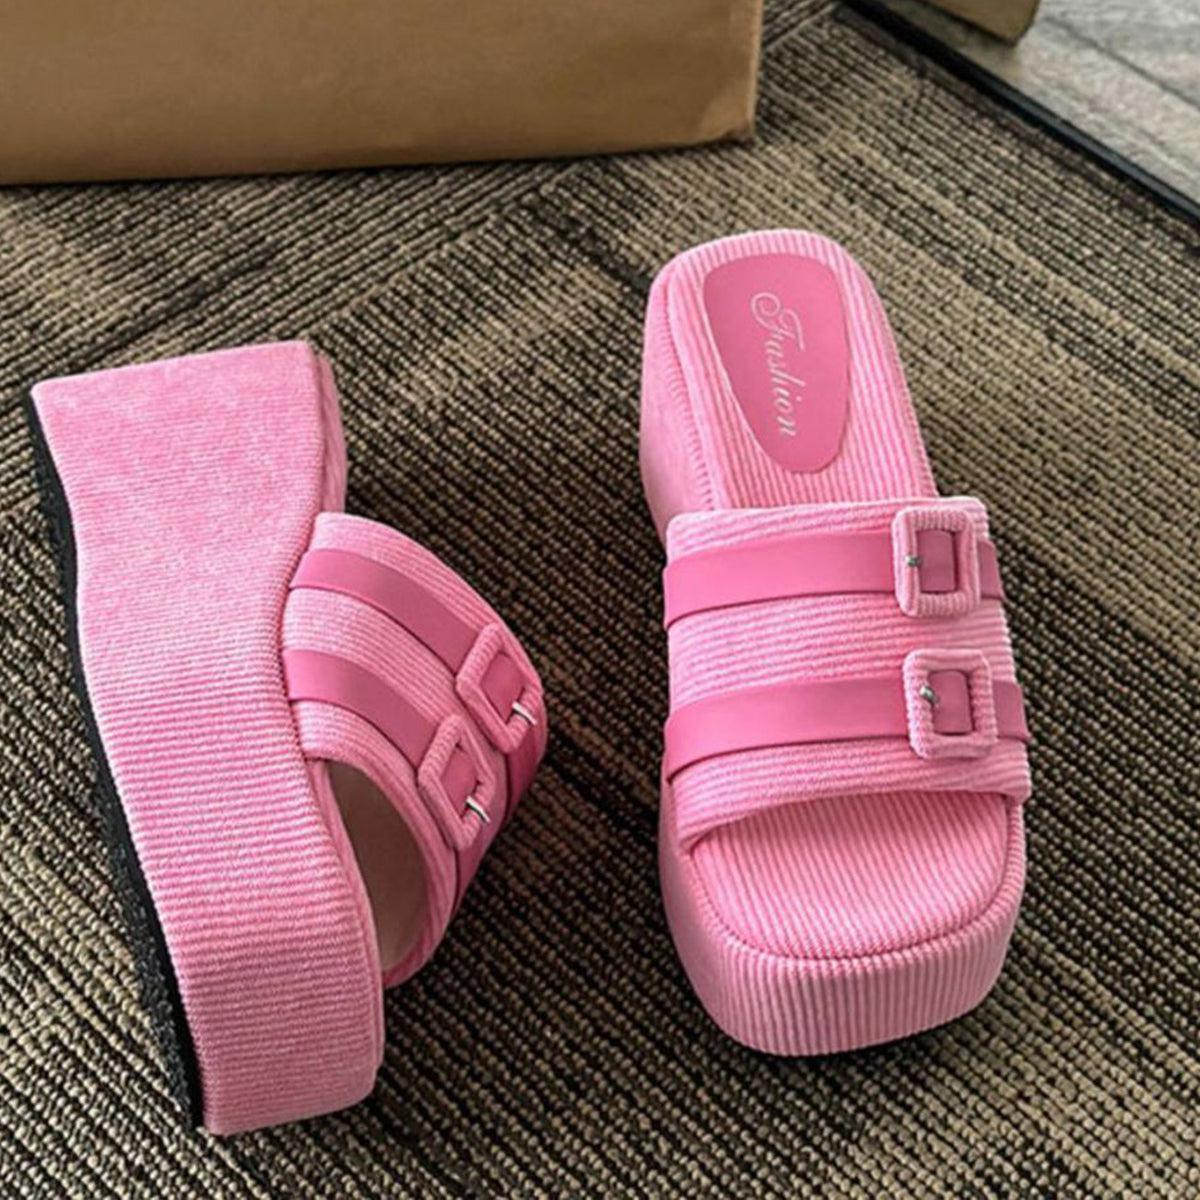 a pair of pink shoes sitting on top of a carpet